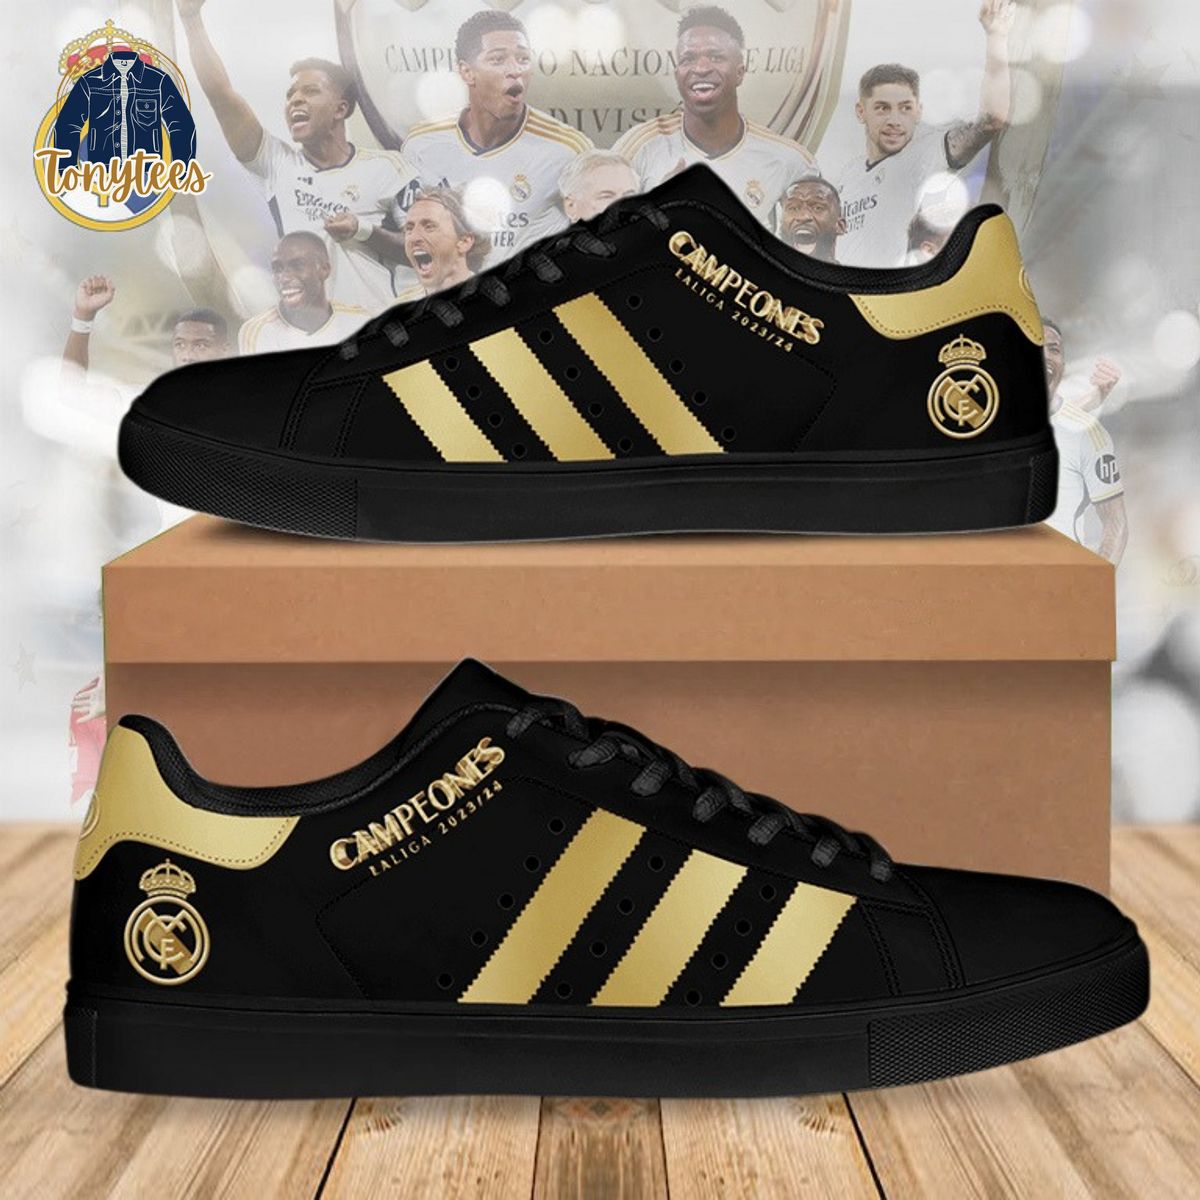 Real Madrid FC Campeones Laliga 2024 Stan Smith Shoes